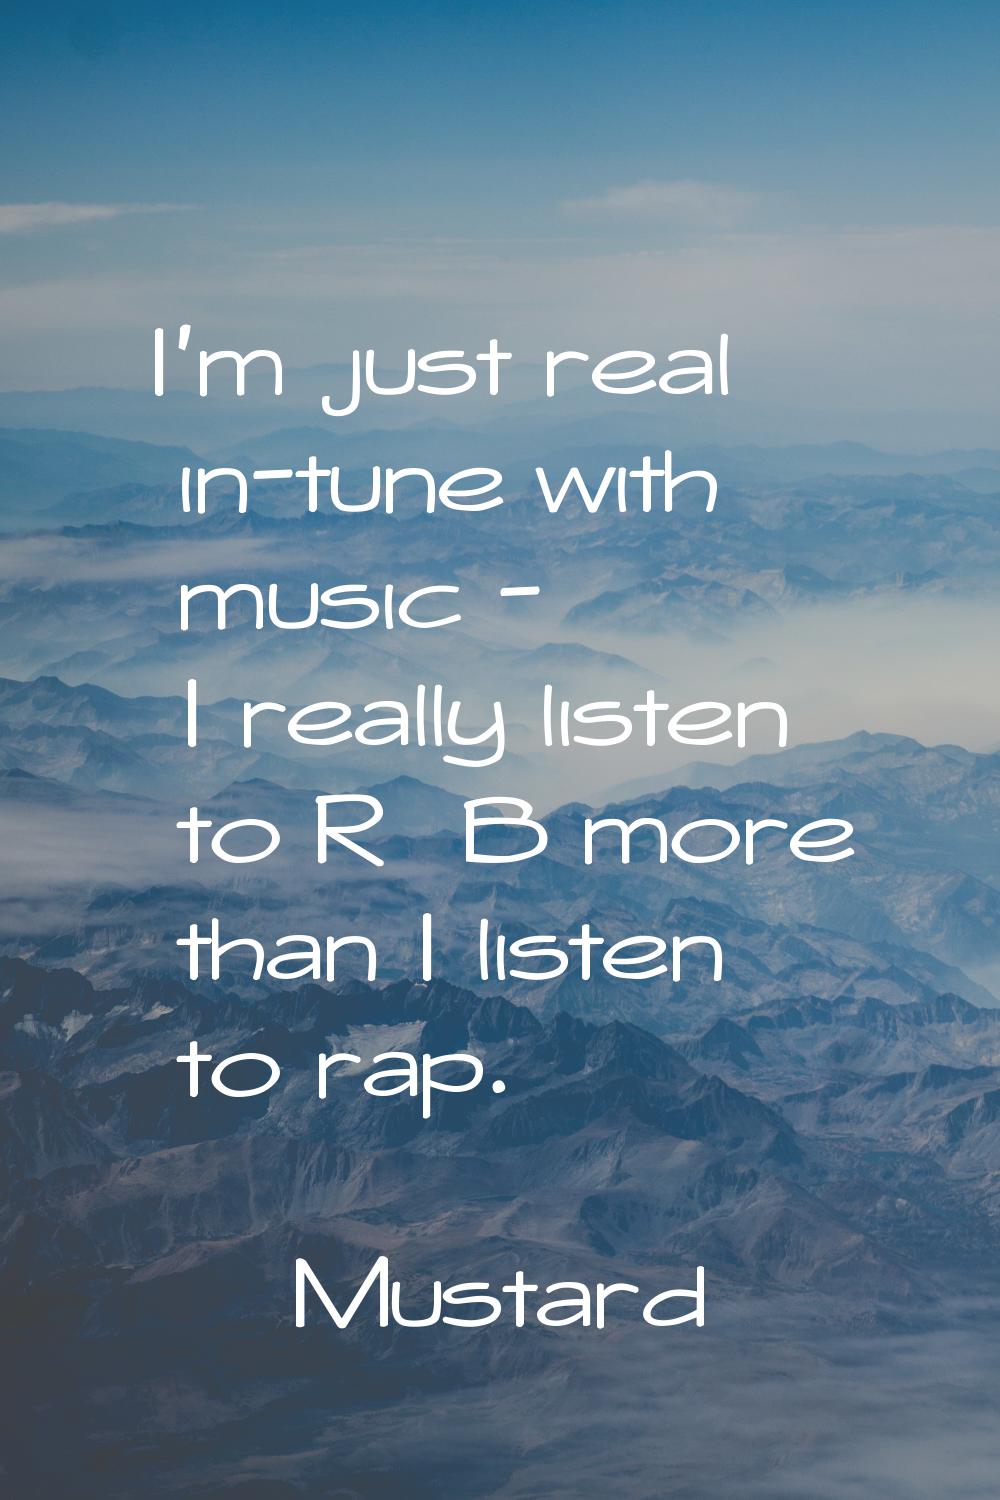 I'm just real in-tune with music - I really listen to R&B more than I listen to rap.